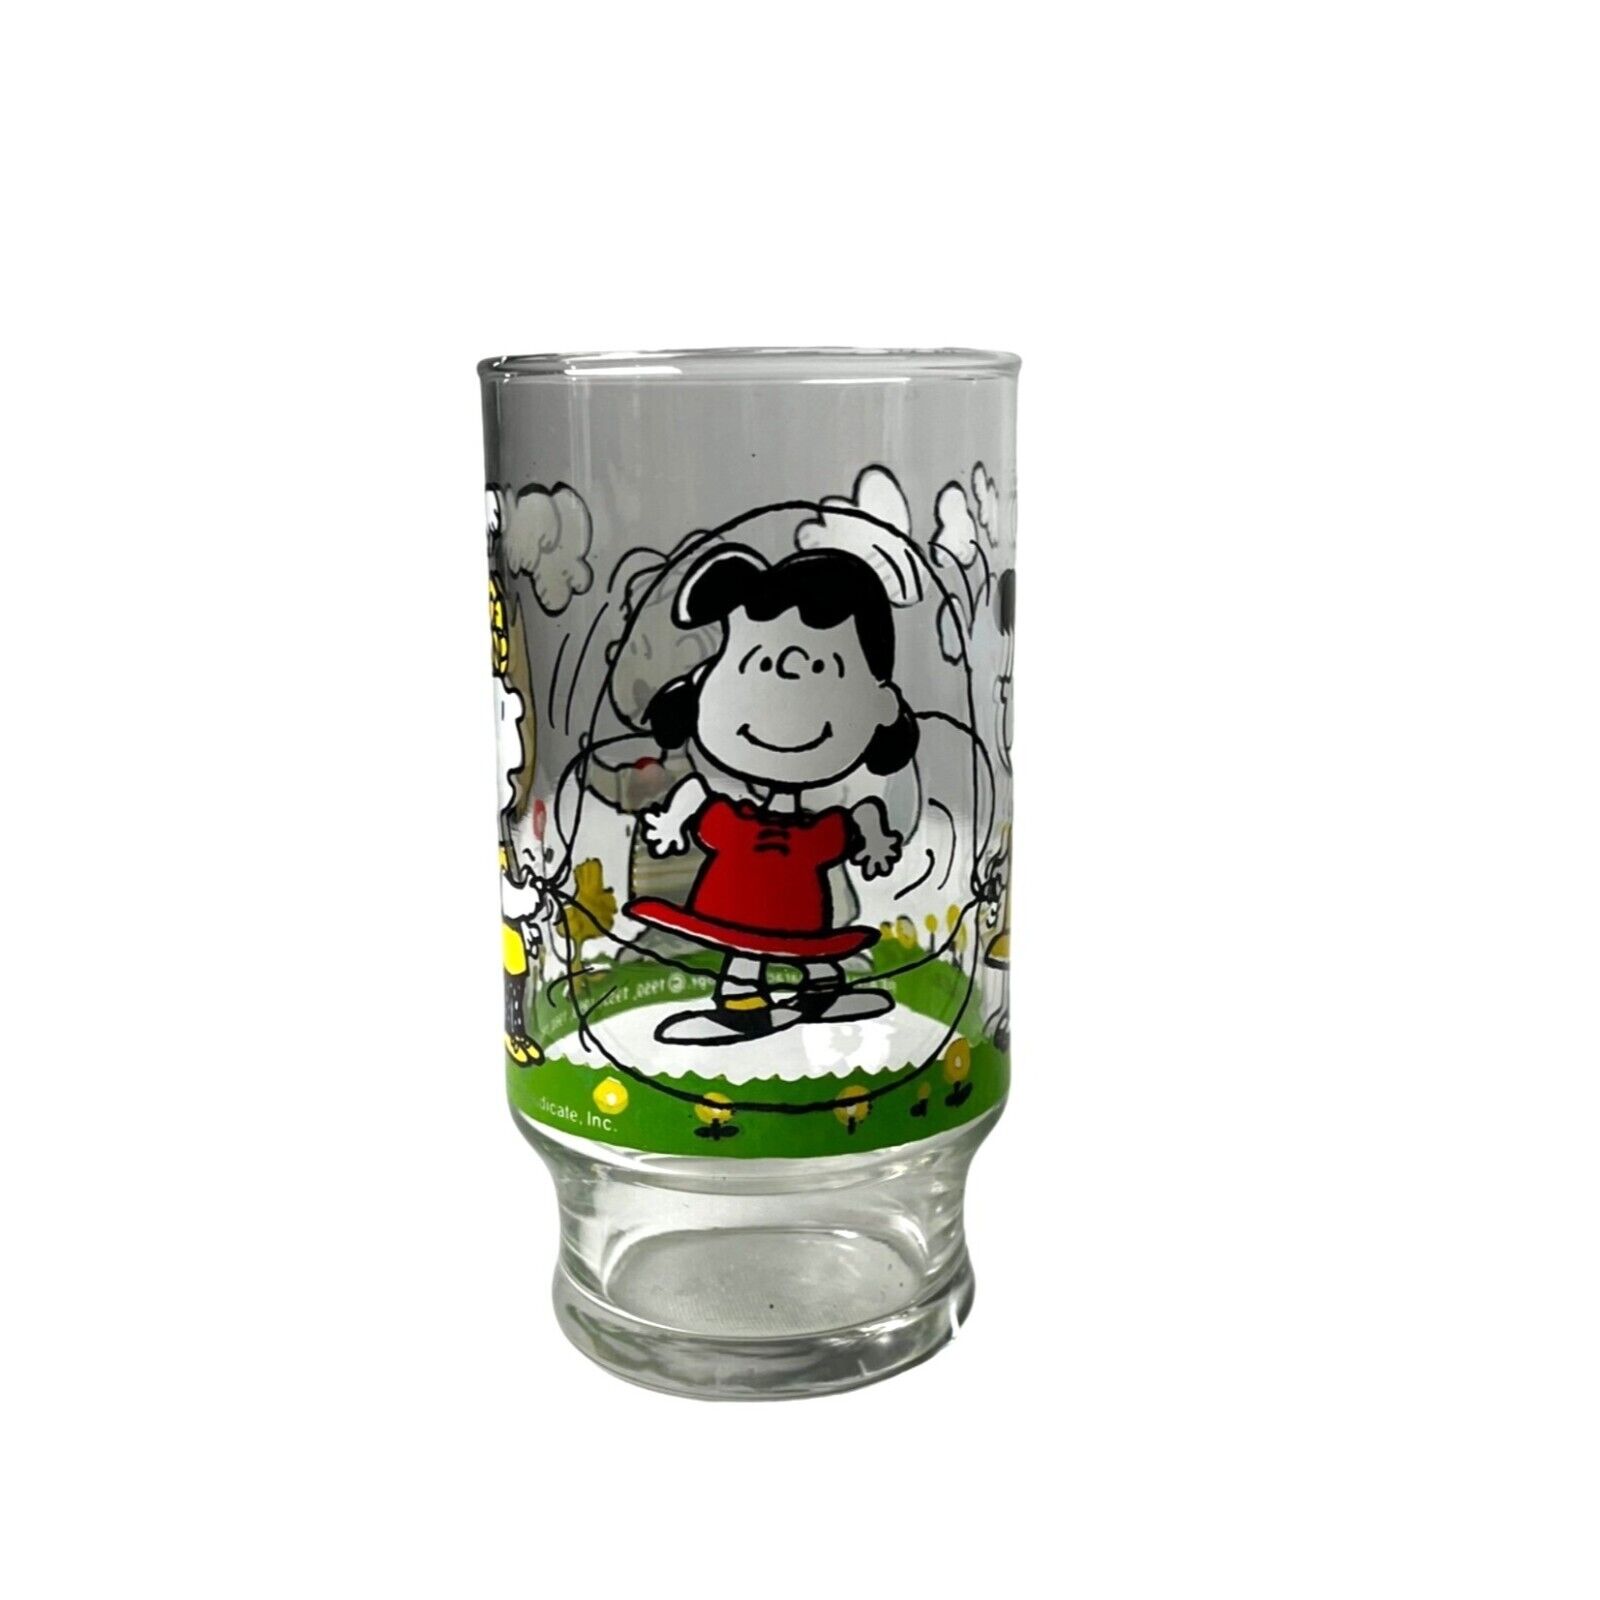 Vintage 1958 Peanuts Gang Drinking Glass Snoopy & Friends Charles Schultz